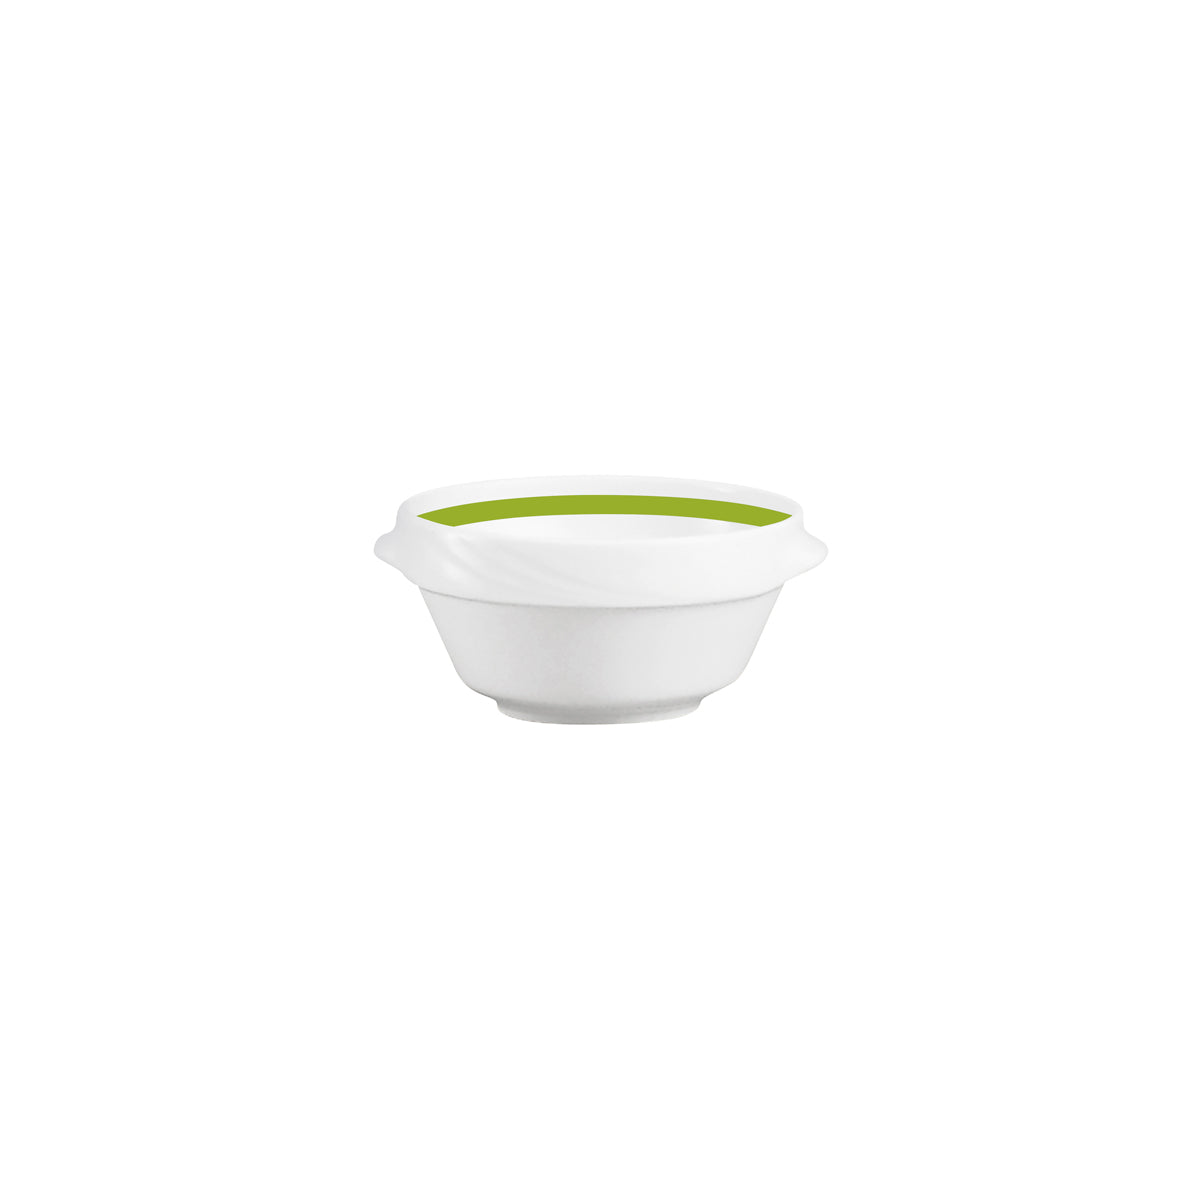 SH9185750/62941 Donna Senior Decor Stackable Round Soup Bowl with Light Green Band 132x67mm / 500ml Tomkin Australia Hospitality Supplies